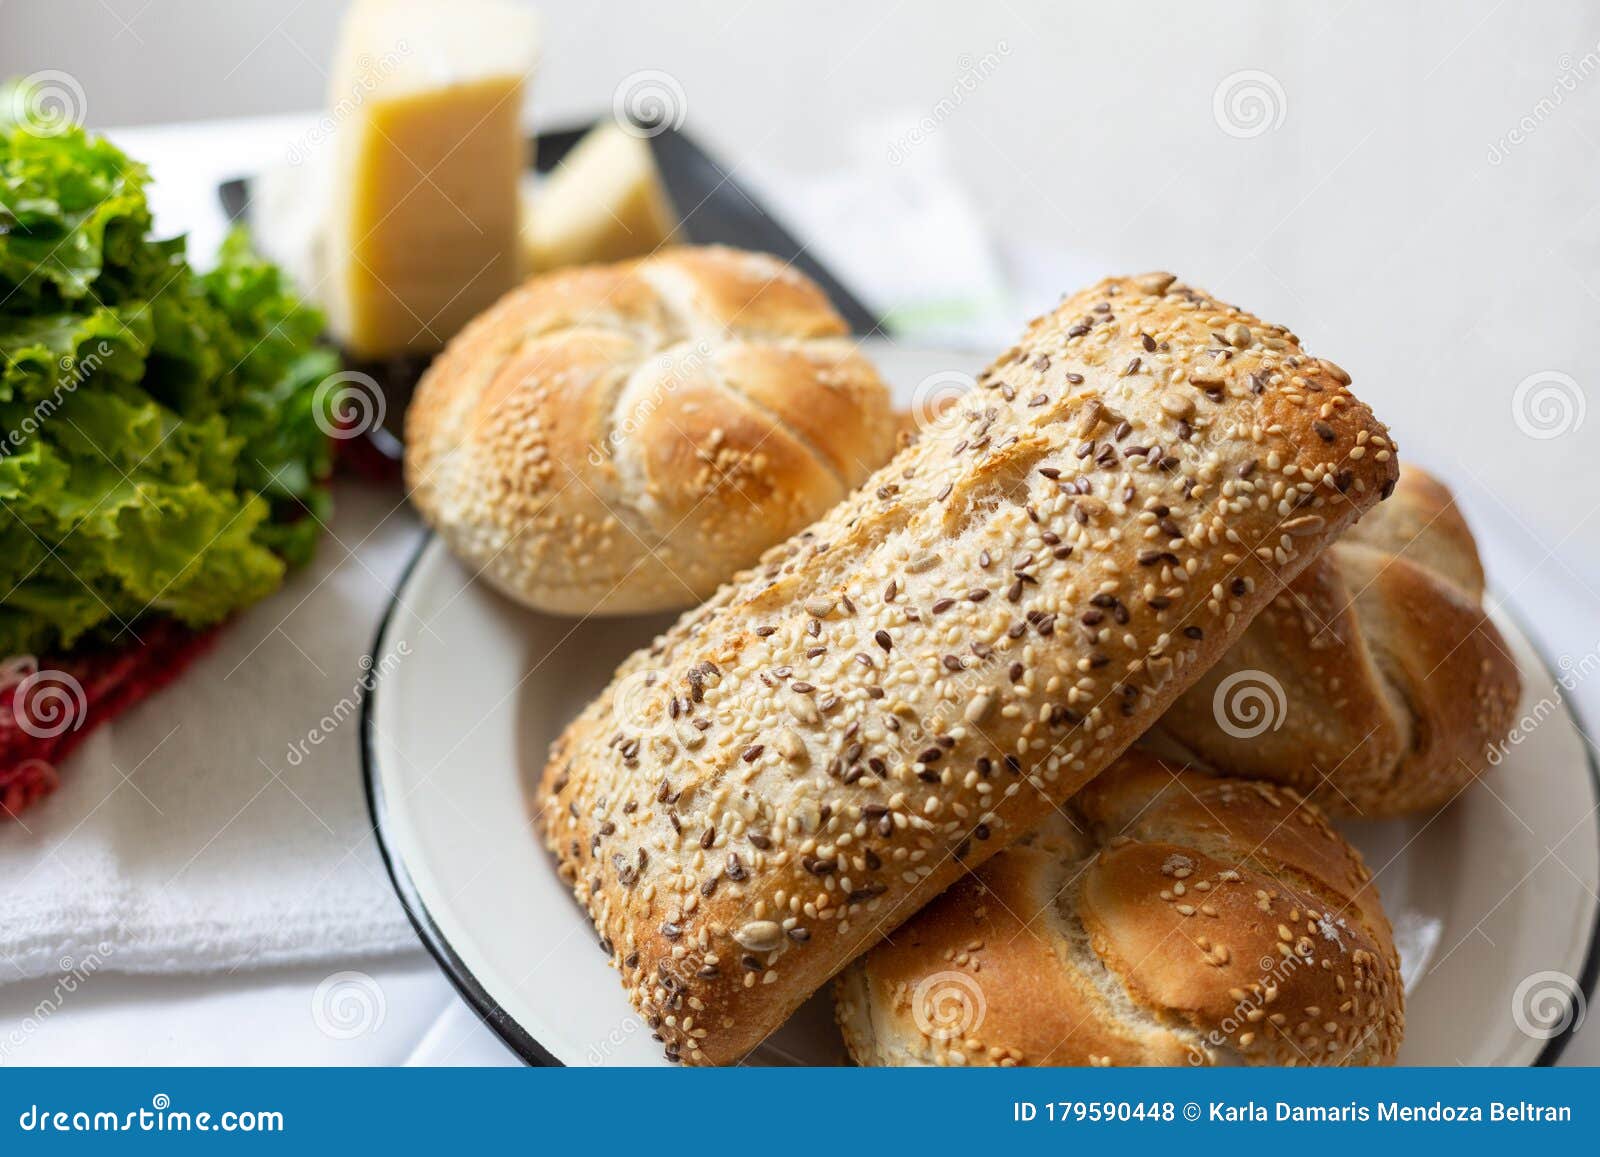 bread with cheese, lettuce and cakes